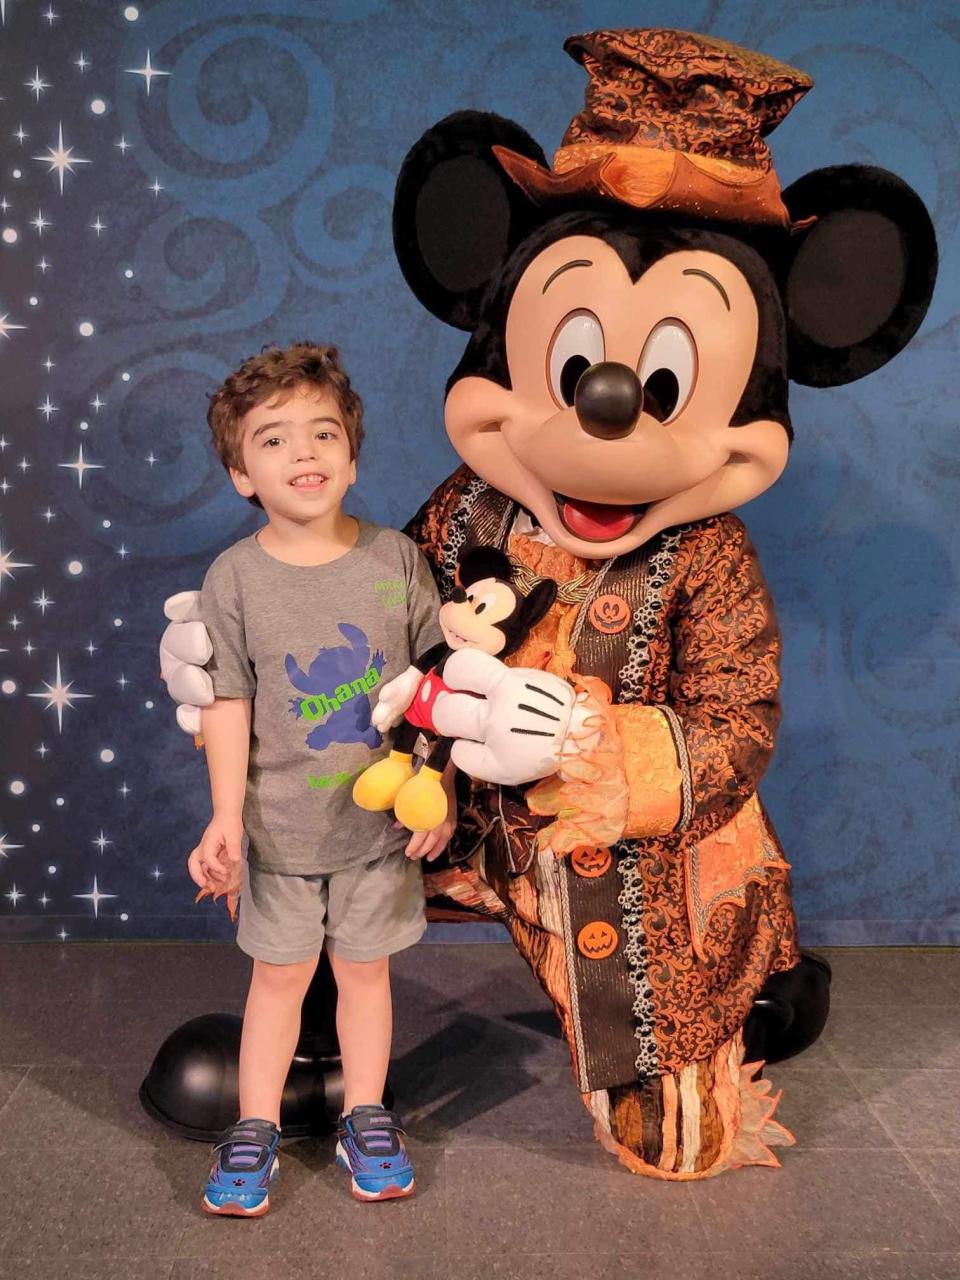 Elliott Althouse, of Monroe, who turns 5 years old today, met Halloween Mickey Mouse at Walt Disney World during his family's recent Make-A-Wish trip to Florida. "It was actually cool and rare to see his Hong Kong Halloween outfit," said Amanda Althouse, Elliott's mother. Elliott is dealing with a very rare syndrome called Lennox-Gastaut Syndrome, a lifelong and aggressive form of epilepsy.